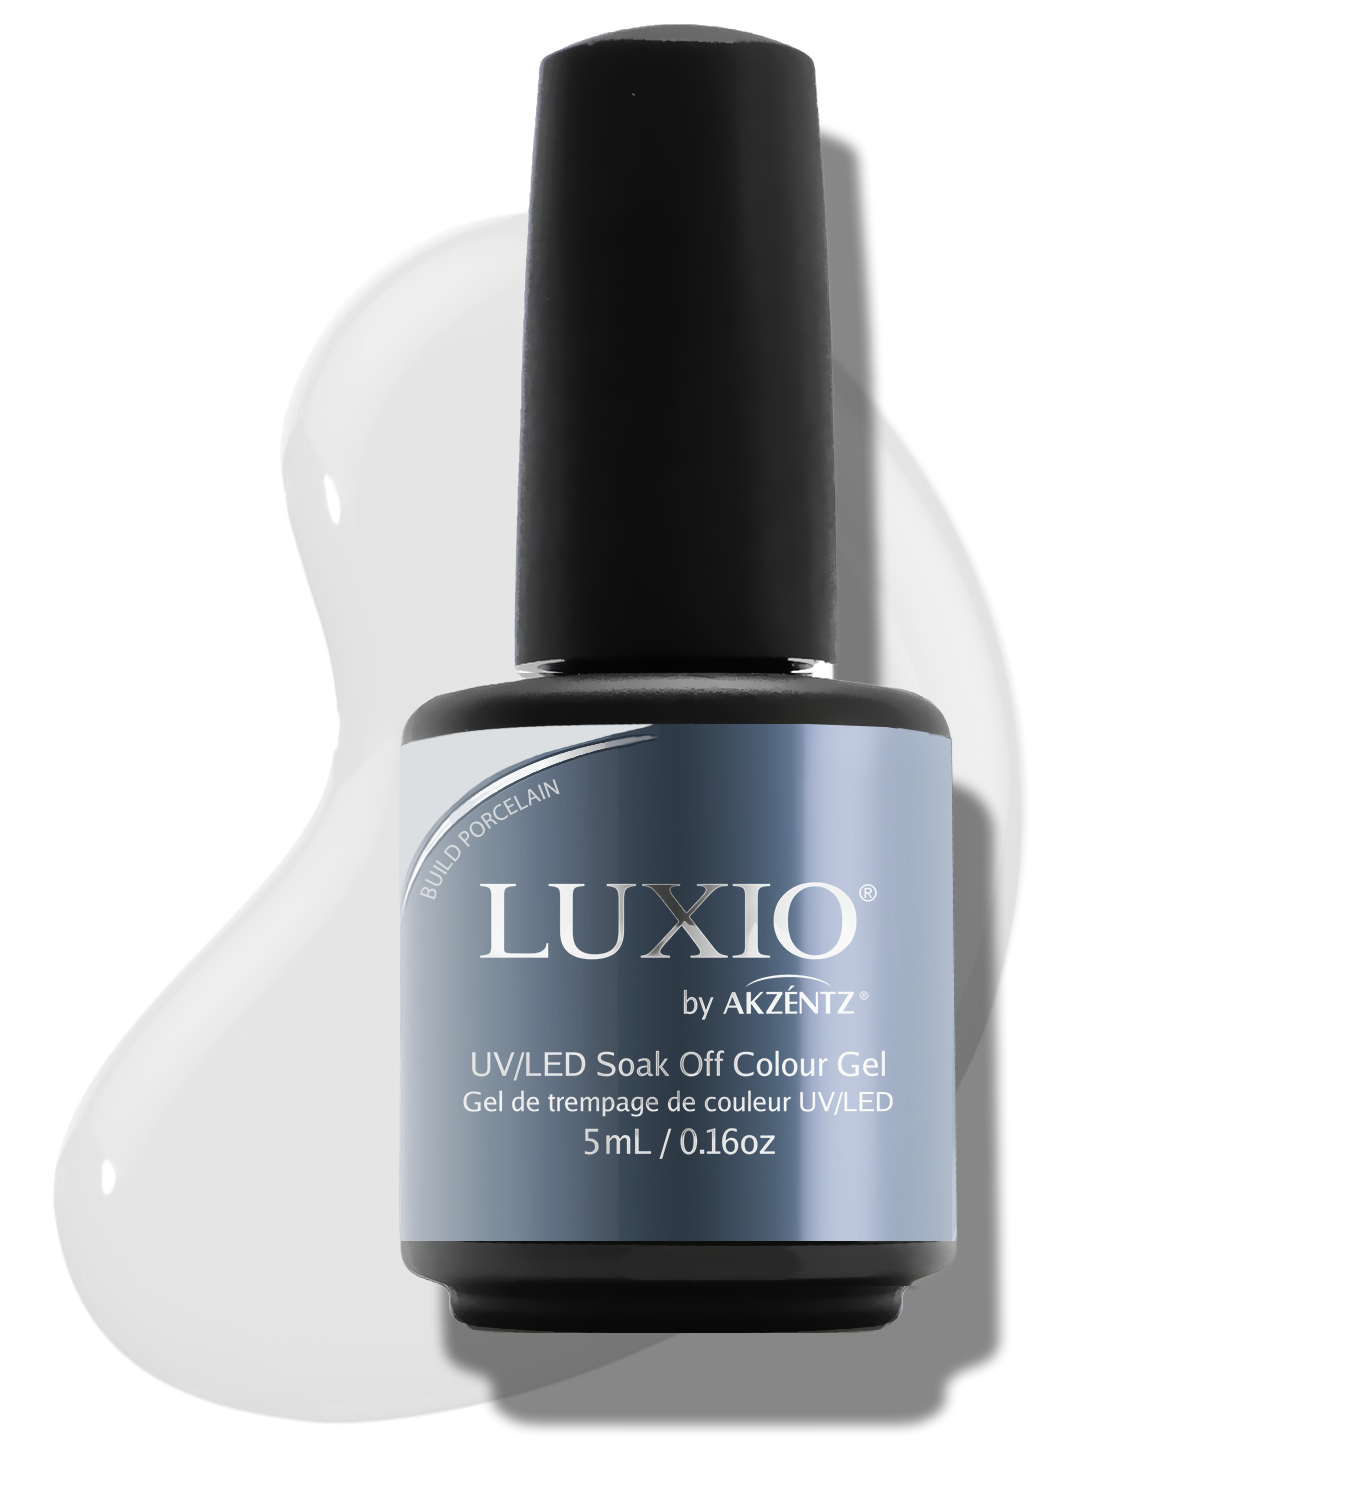 LUXIO by AKZENTZ - 3 FULL SIZE (15ml) TINTED BUILD STUDIO N°9 COLLECTION!